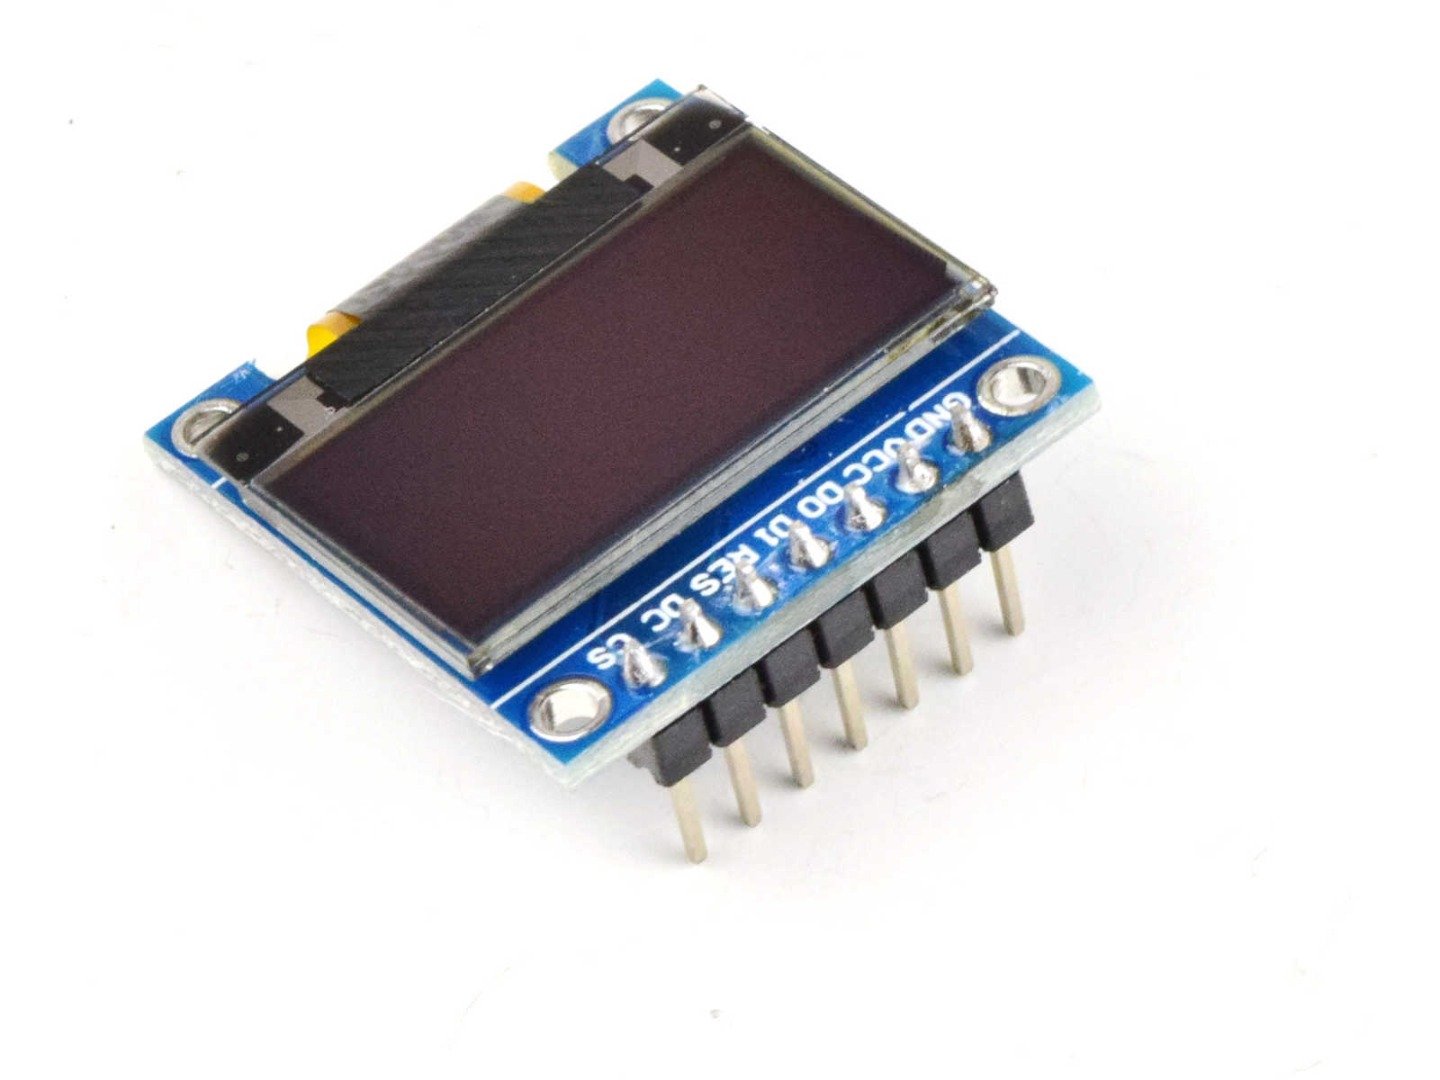 OLED Display 0.96 inch 128×64 with SPI interface – 3-5V (100% compatible with Arduino) 8